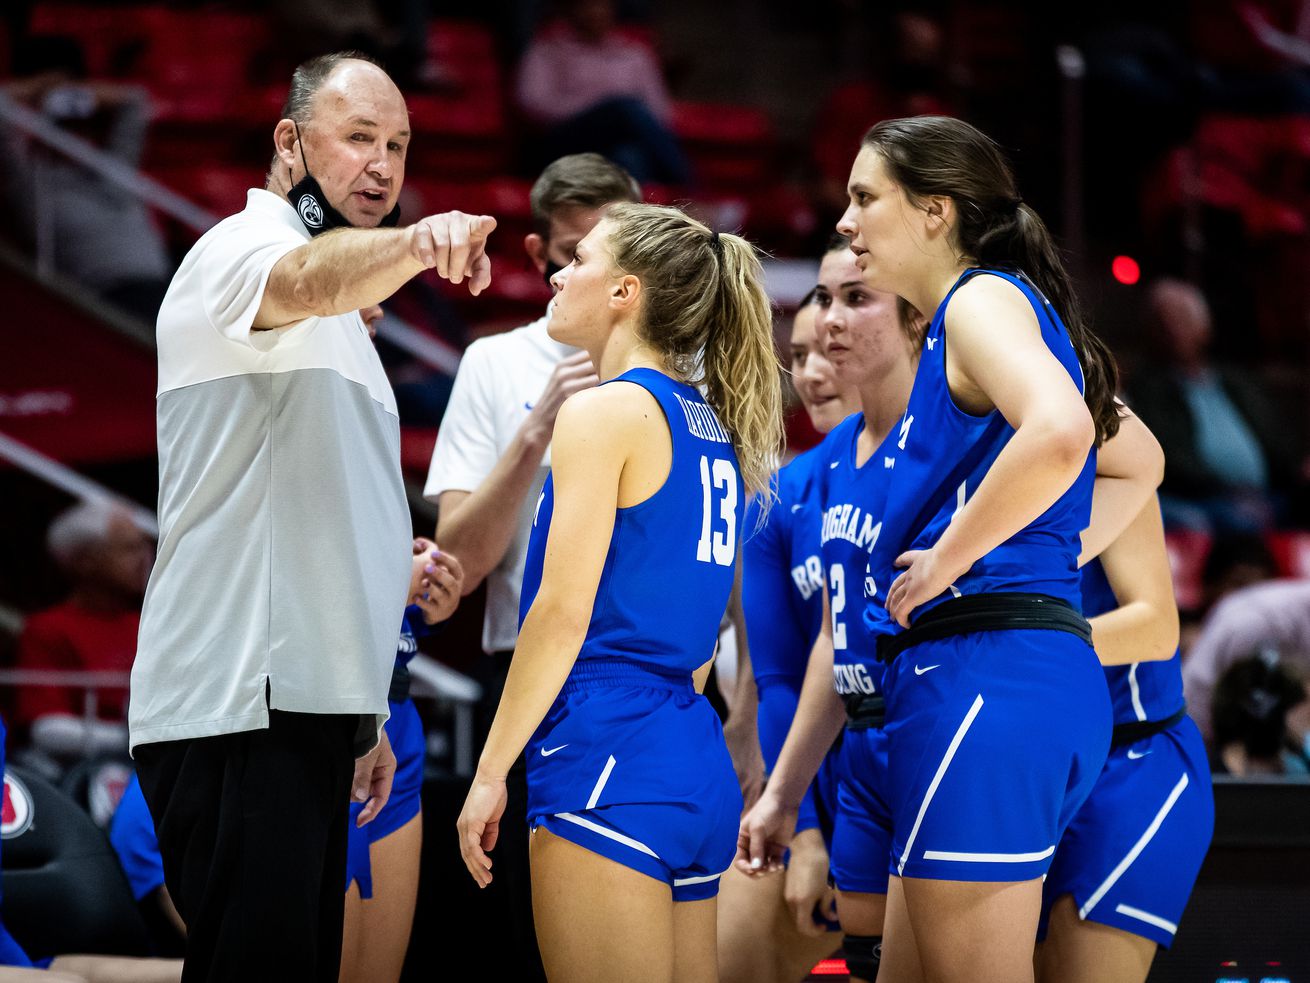 Could BYU women’s hoops go all the way?